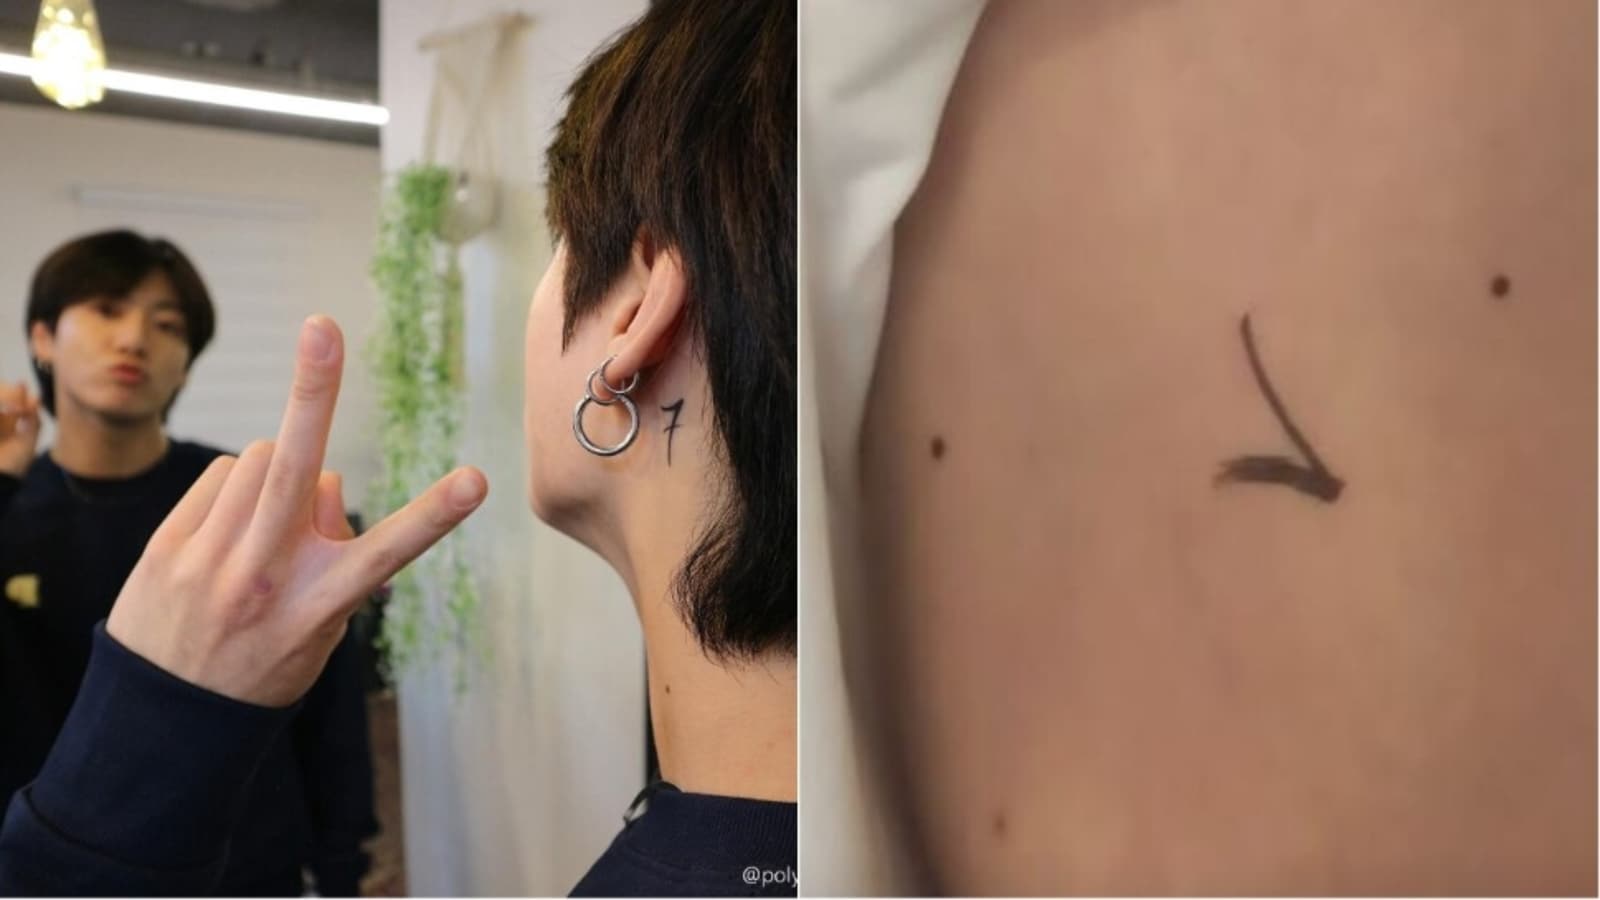 BTS Jungkook Gets Friendship Tattoo Behind Ear Reveals Full Sleeve V  Gets His 7 Between Moles on Arm